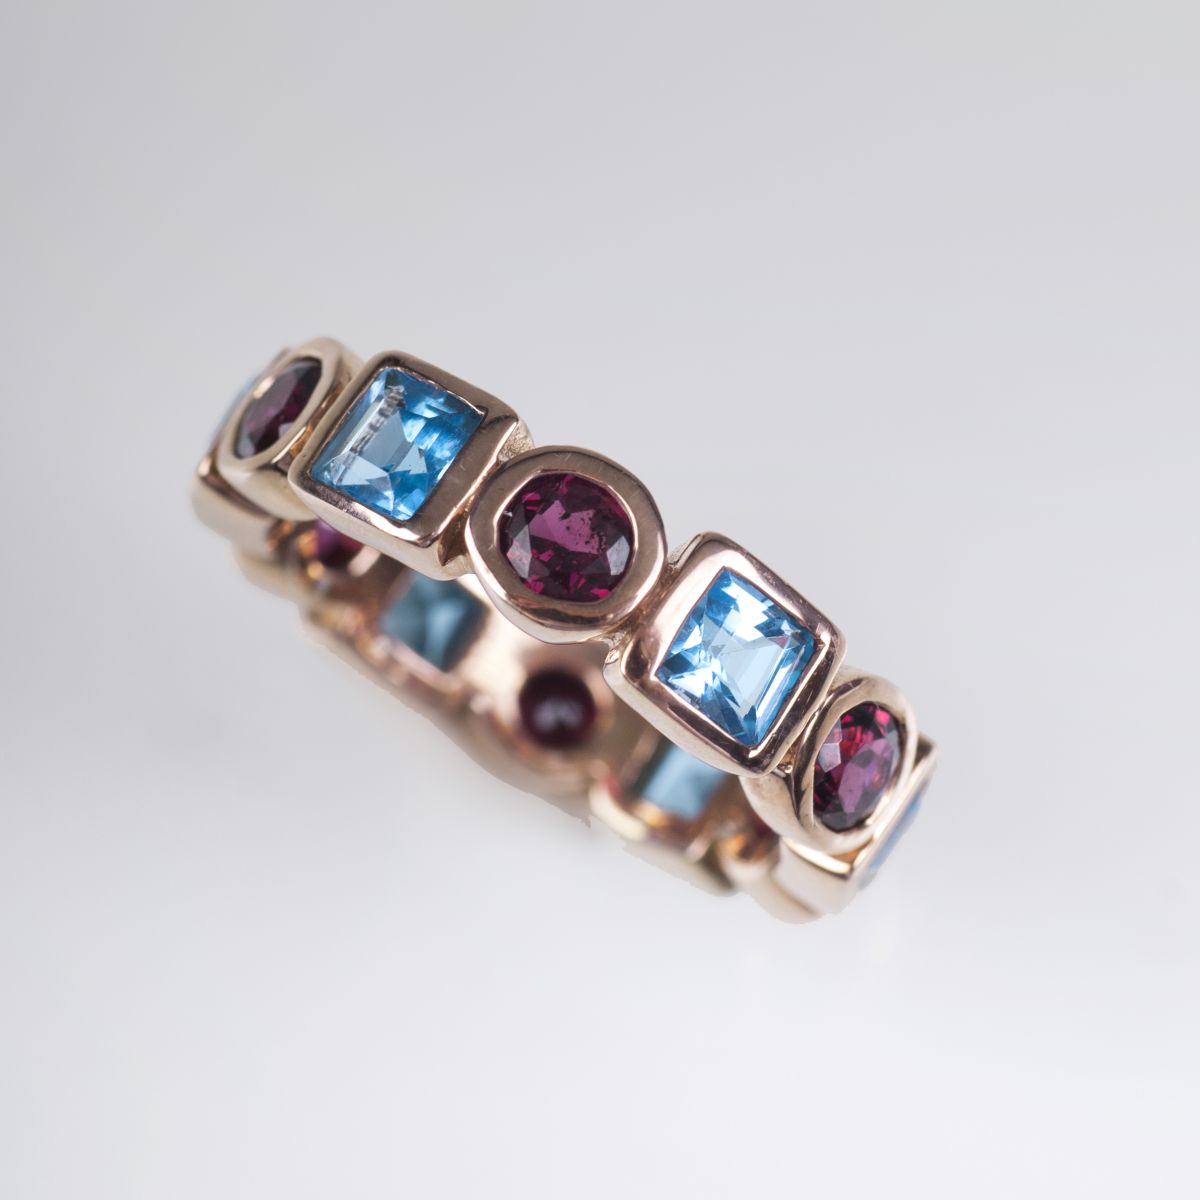 A memory ring with blue topaz and garnet